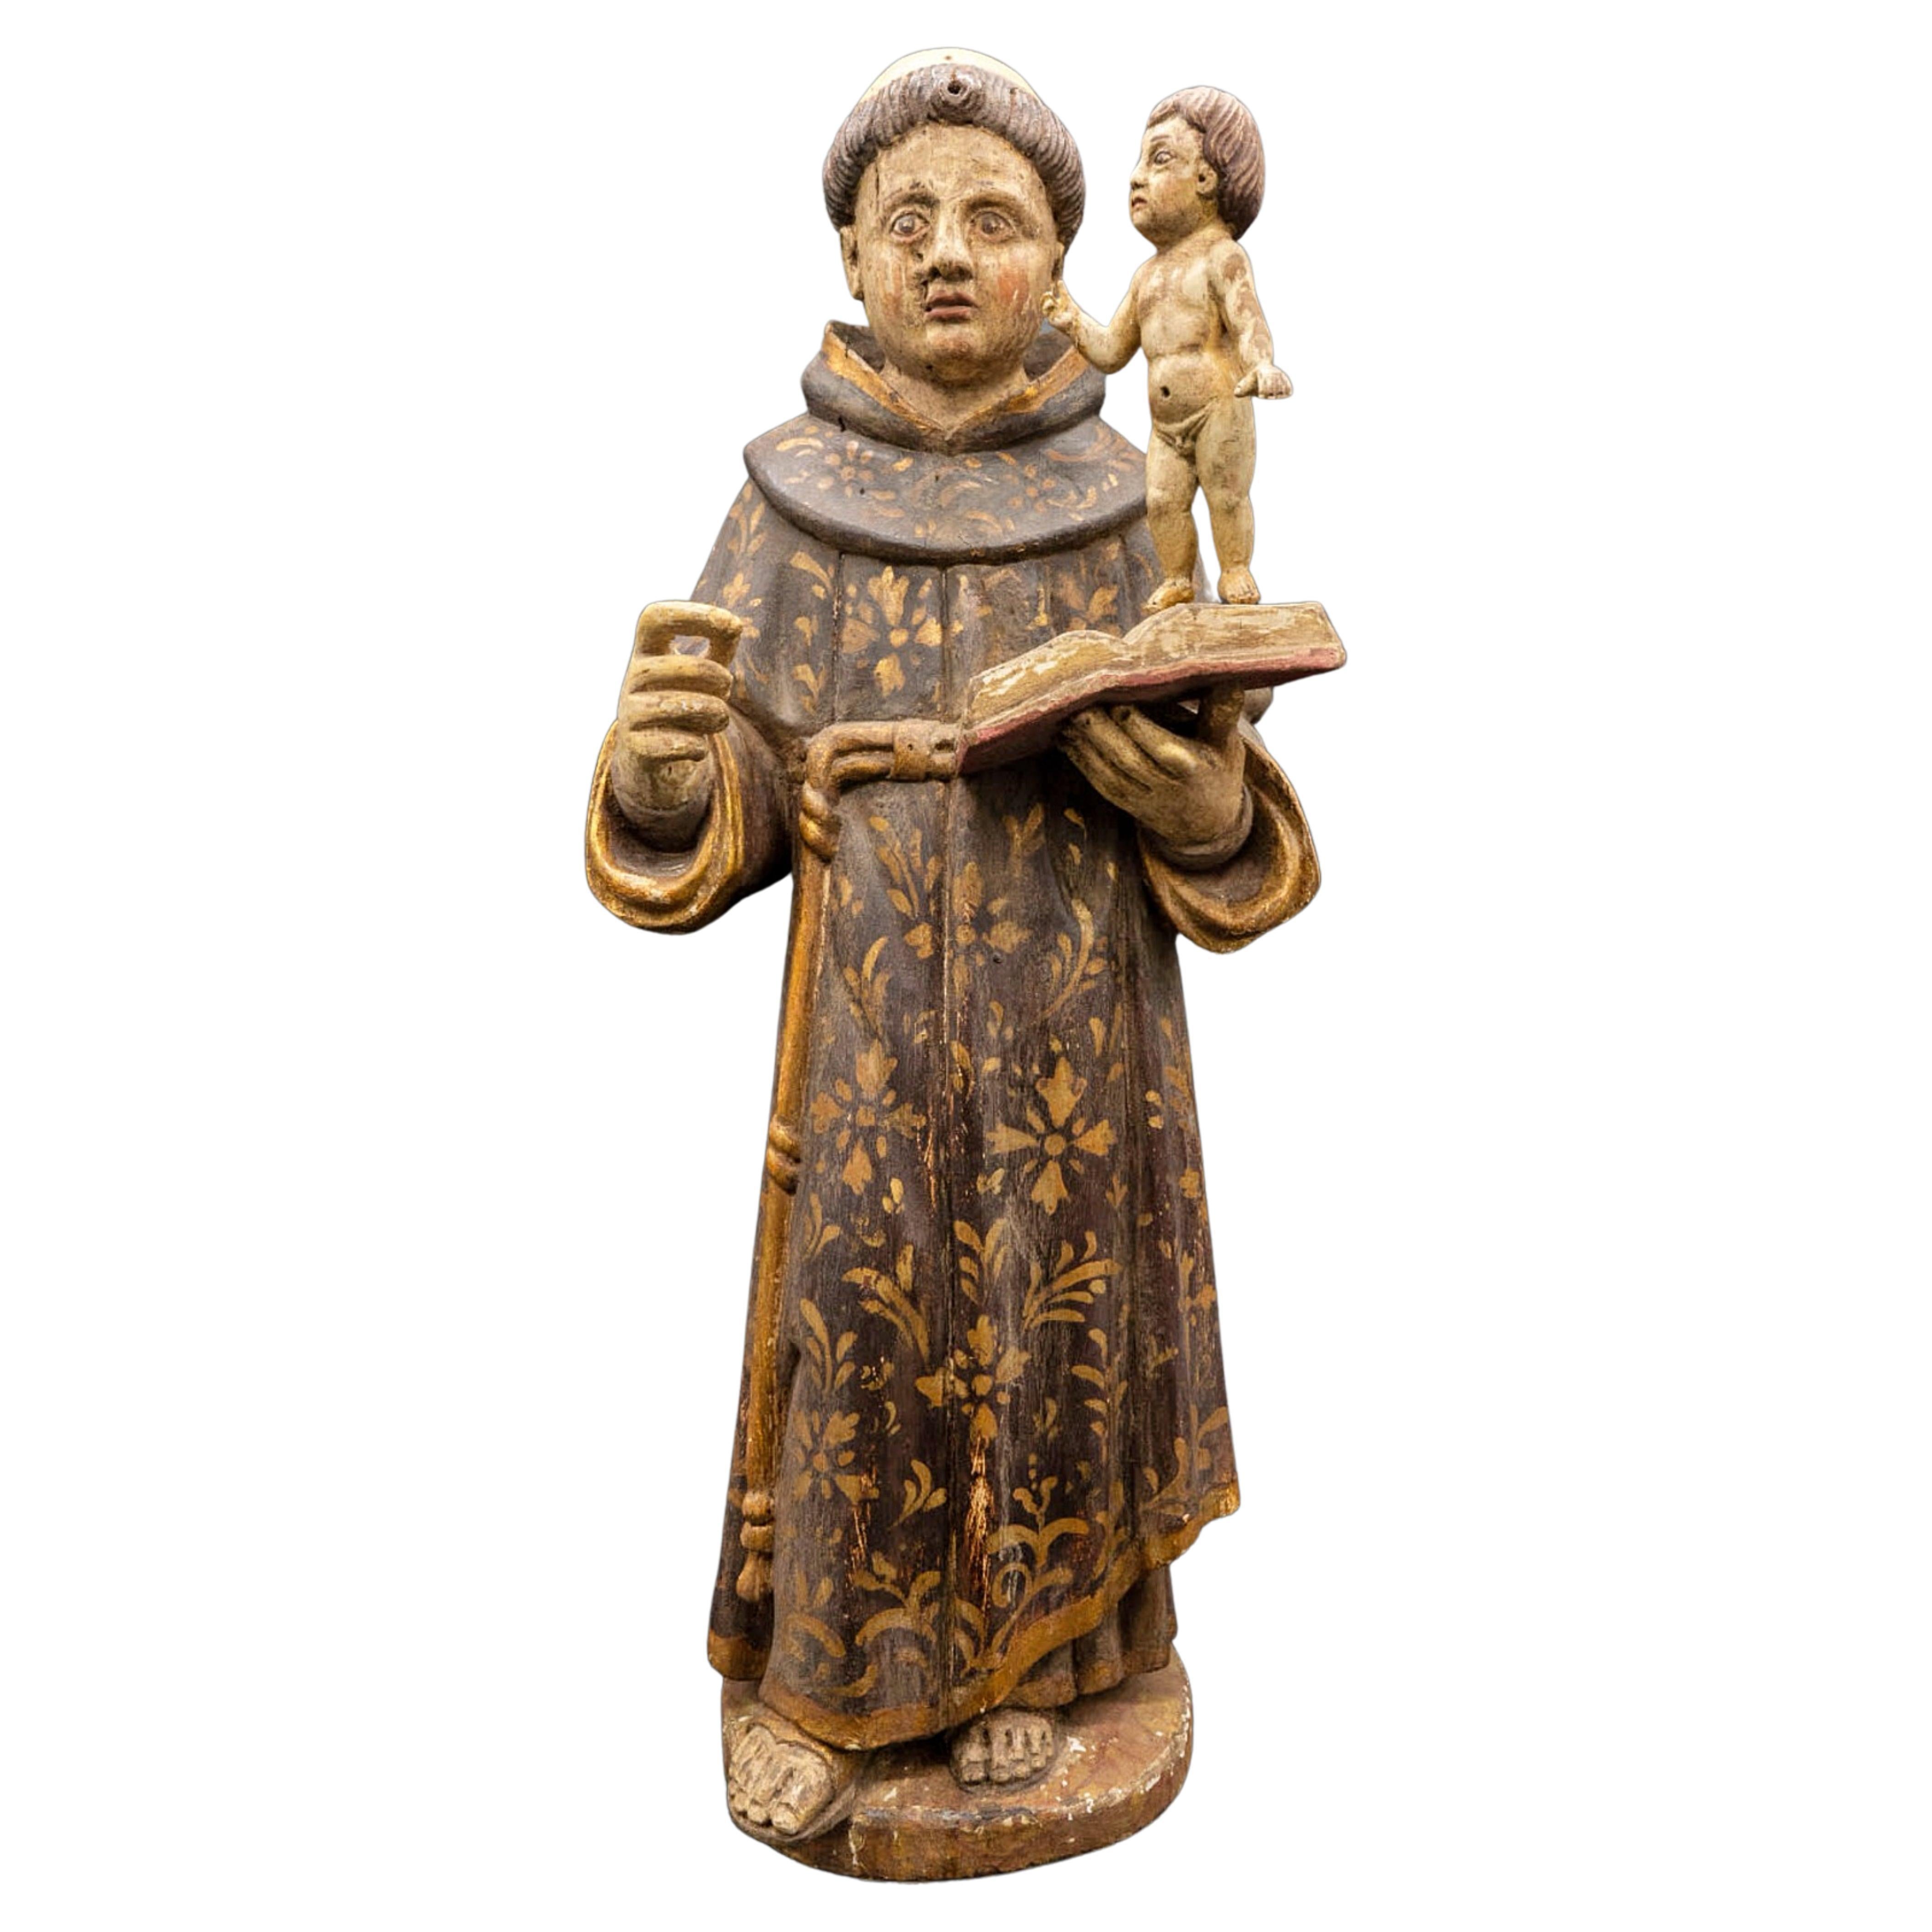 Spanish Sculpture of the 17th Century "Saint Antony and the Child Jesus" For Sale